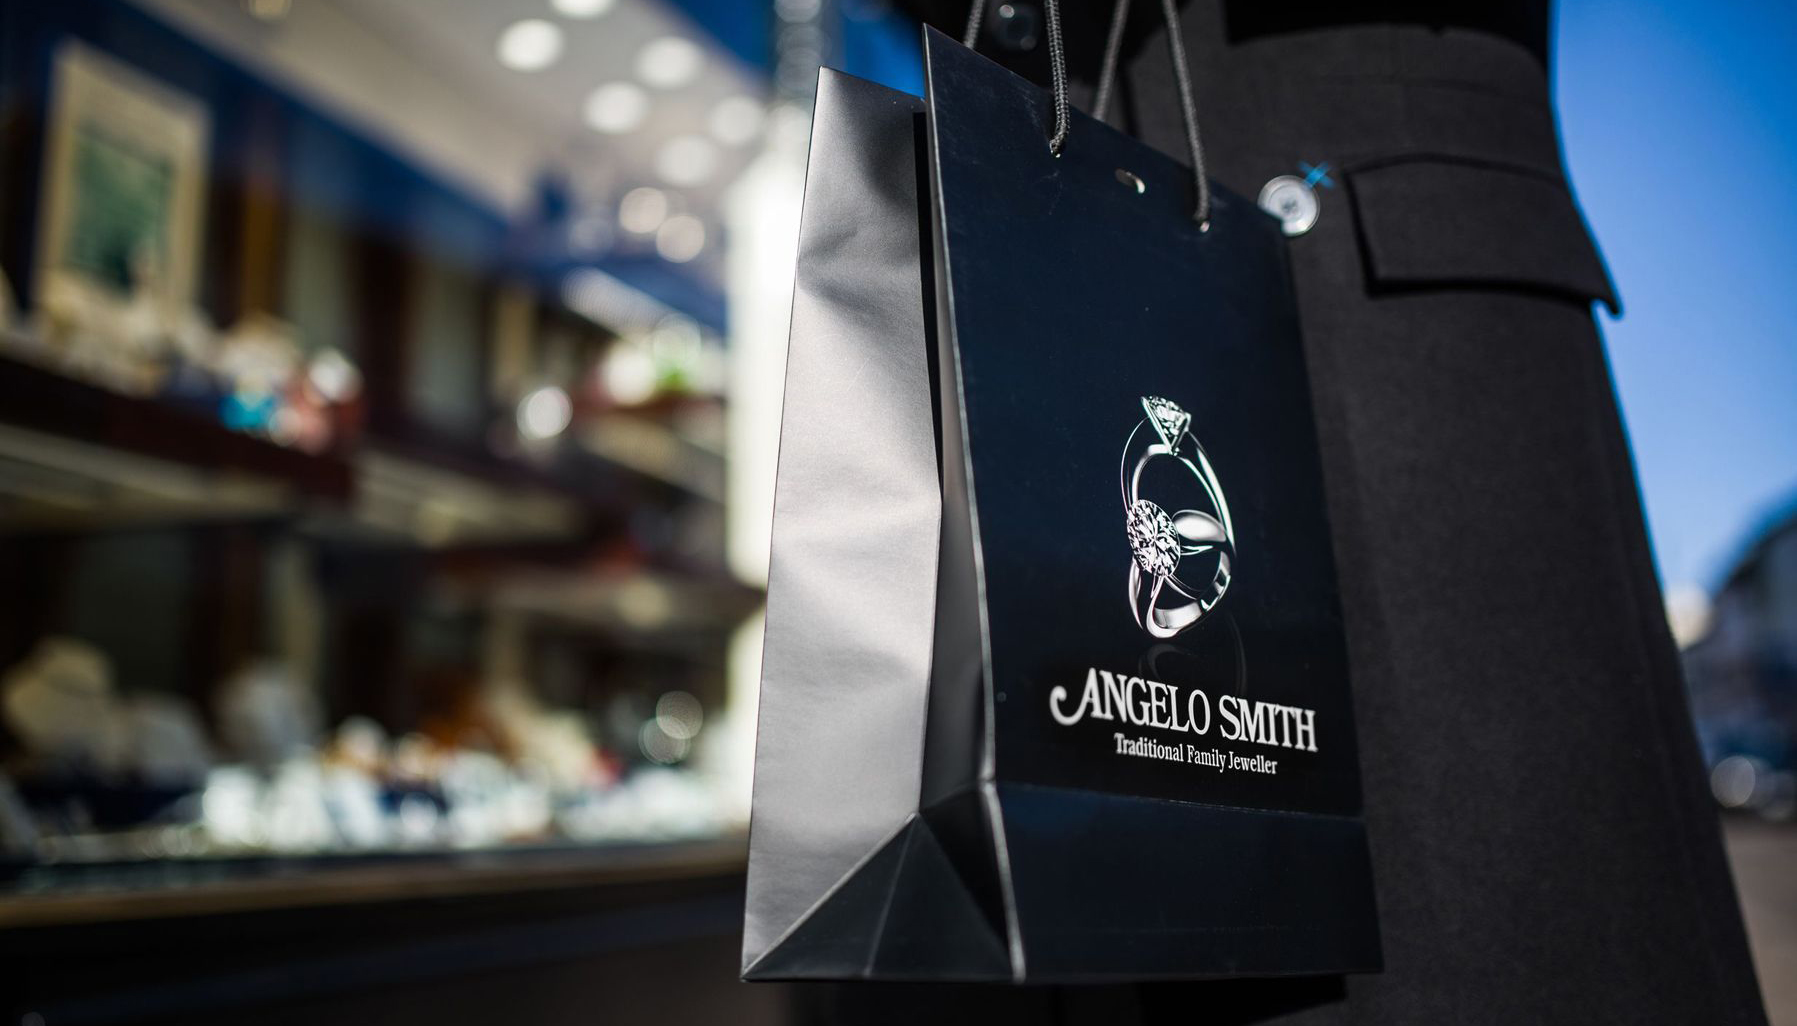 An Angelo Smith branded carrier bag is held outside the showroom window.